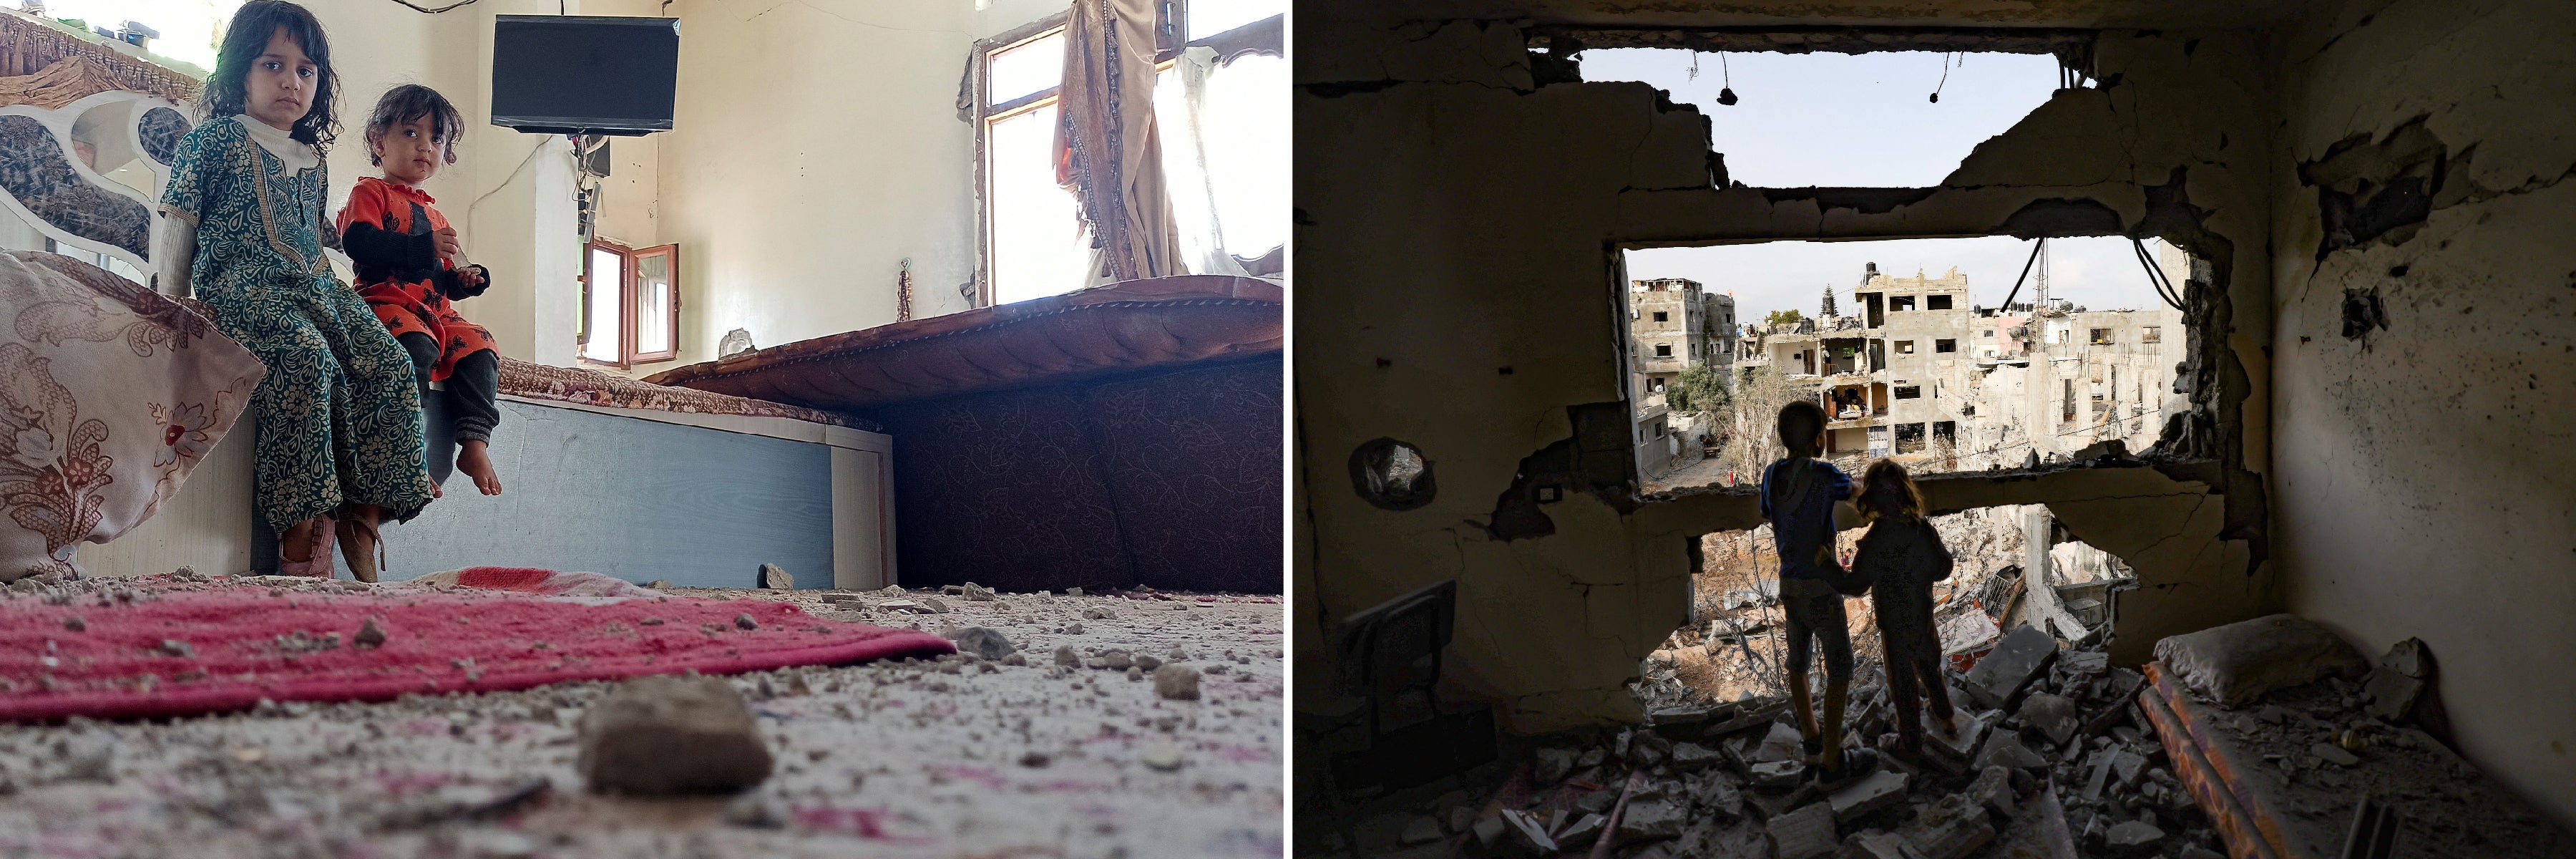 LEFT: Girls in a bedroom of their house damaged by Saudi-led air strikes on a nearby military site in Sanaa, Yemen, January 19, 2022. © 2022 Khaled Abdullah/Reuters RIGHT: Palestinian children who have returned to their neighborhood observe the damage from their home which was struck by an Israeli attack in Gaza City on May 21, 2021.